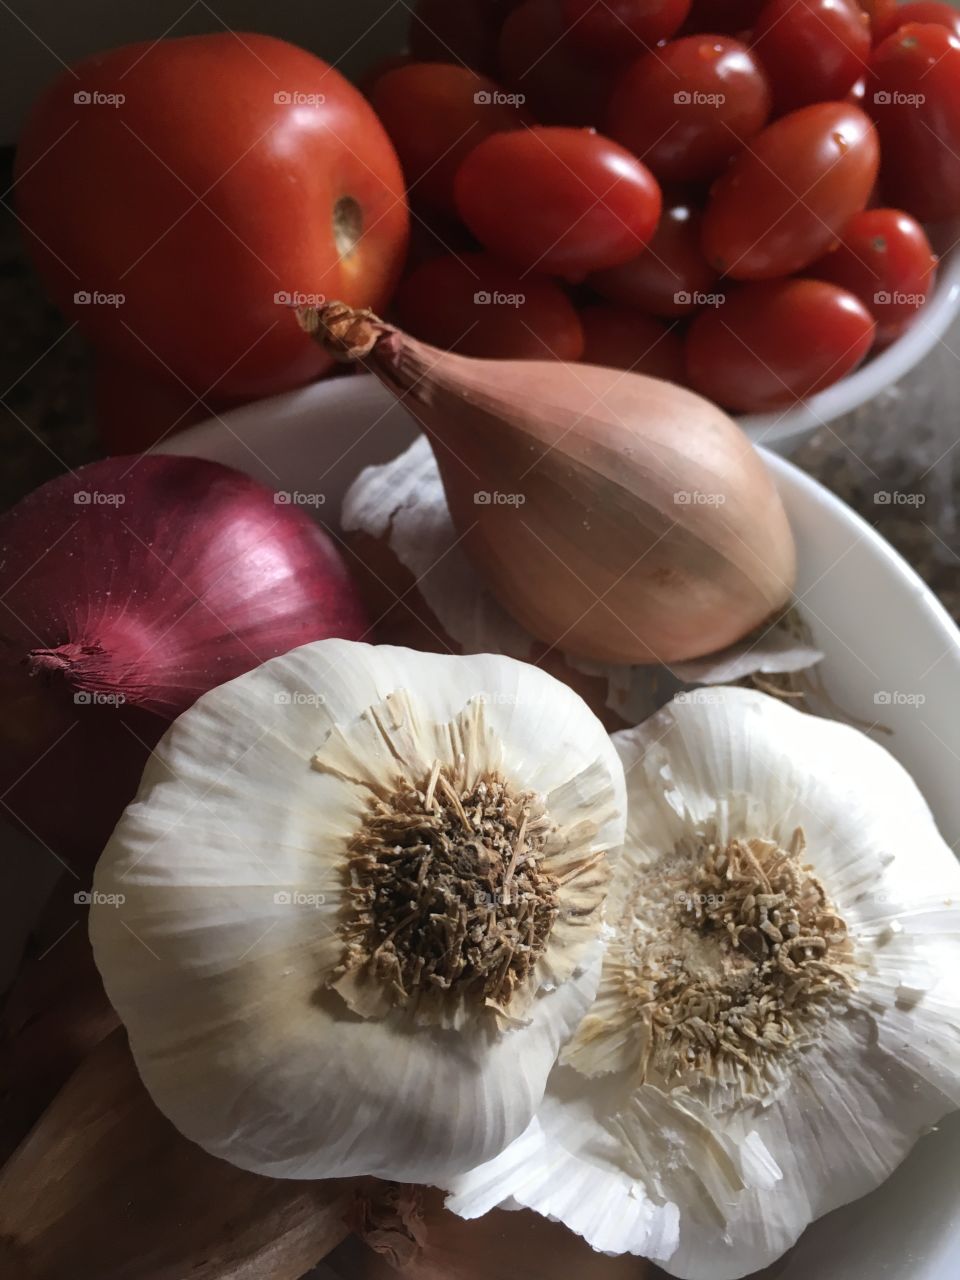 Ingredients for Pasta Sauce.  Onions, tomatoes, garlic, are the ingredients for pasta sauce. 